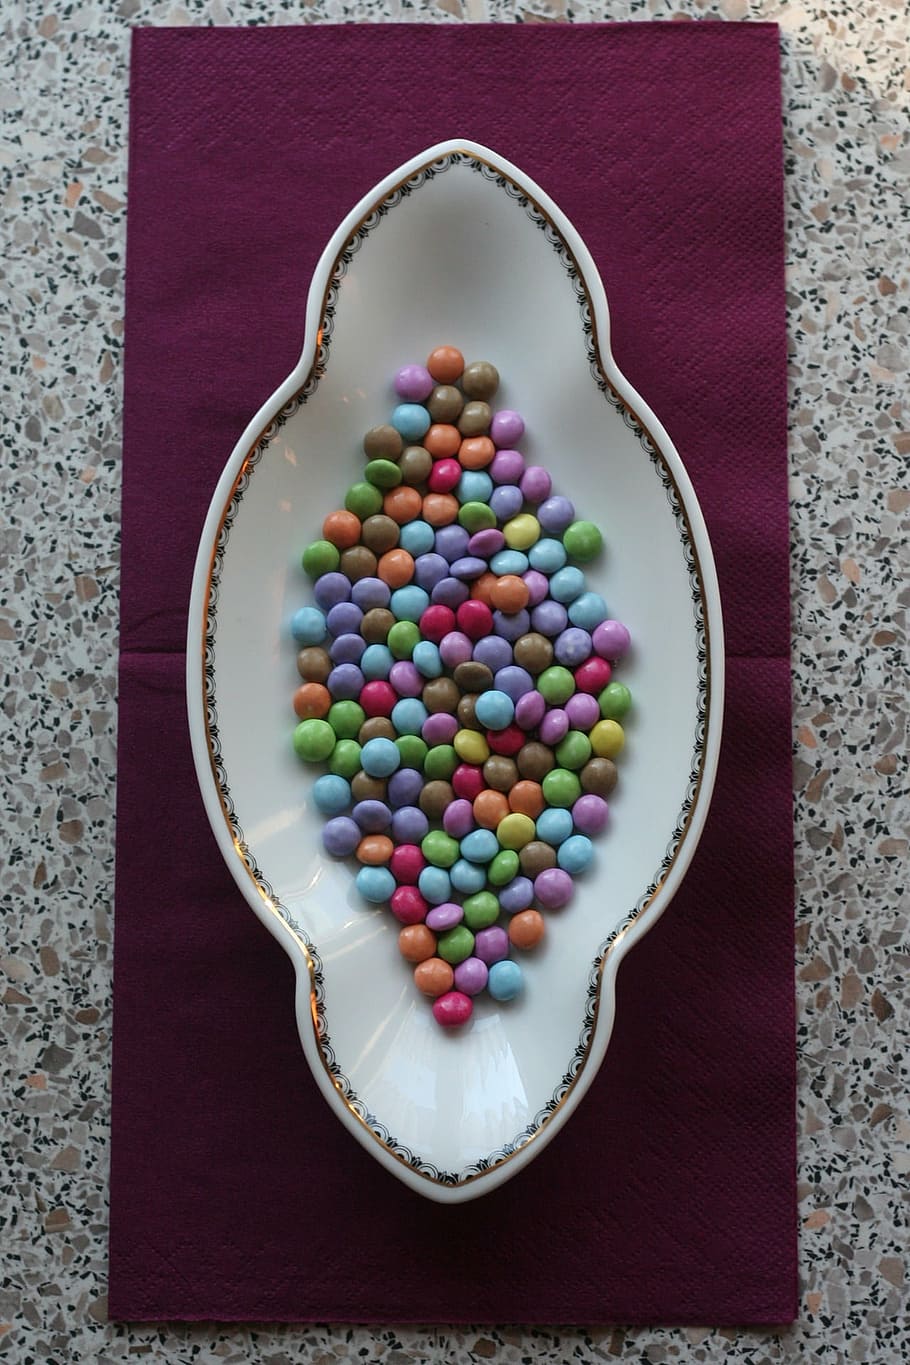 chocolate lentils, brand, sweet, colorful, smarties, decoration, multi Colored, directly above, sweet food, food